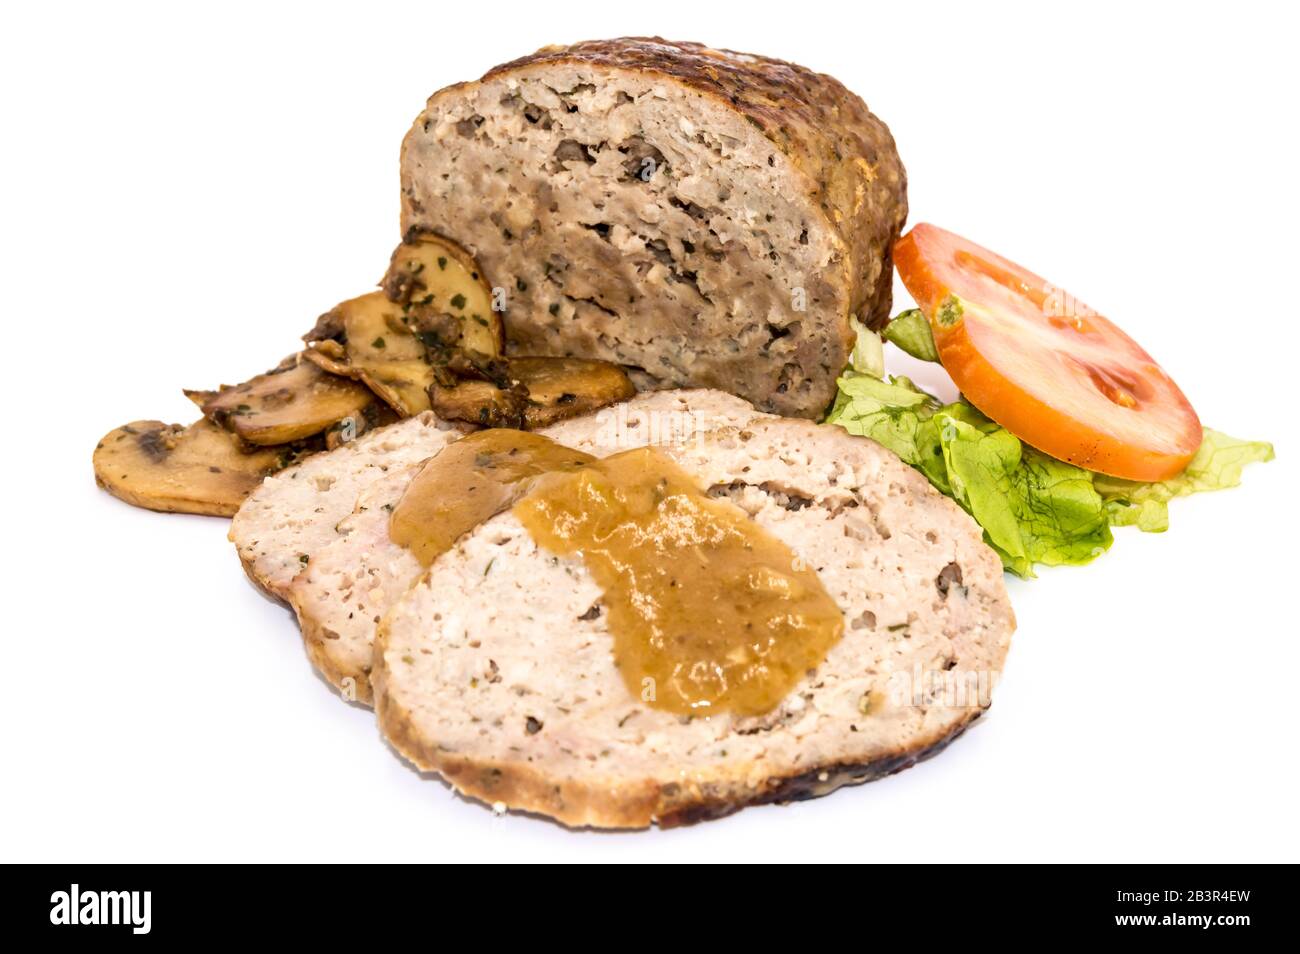 Meatloaf cut into slices with mushrooms, tomato and salad on an isolated white background. Stock Photo